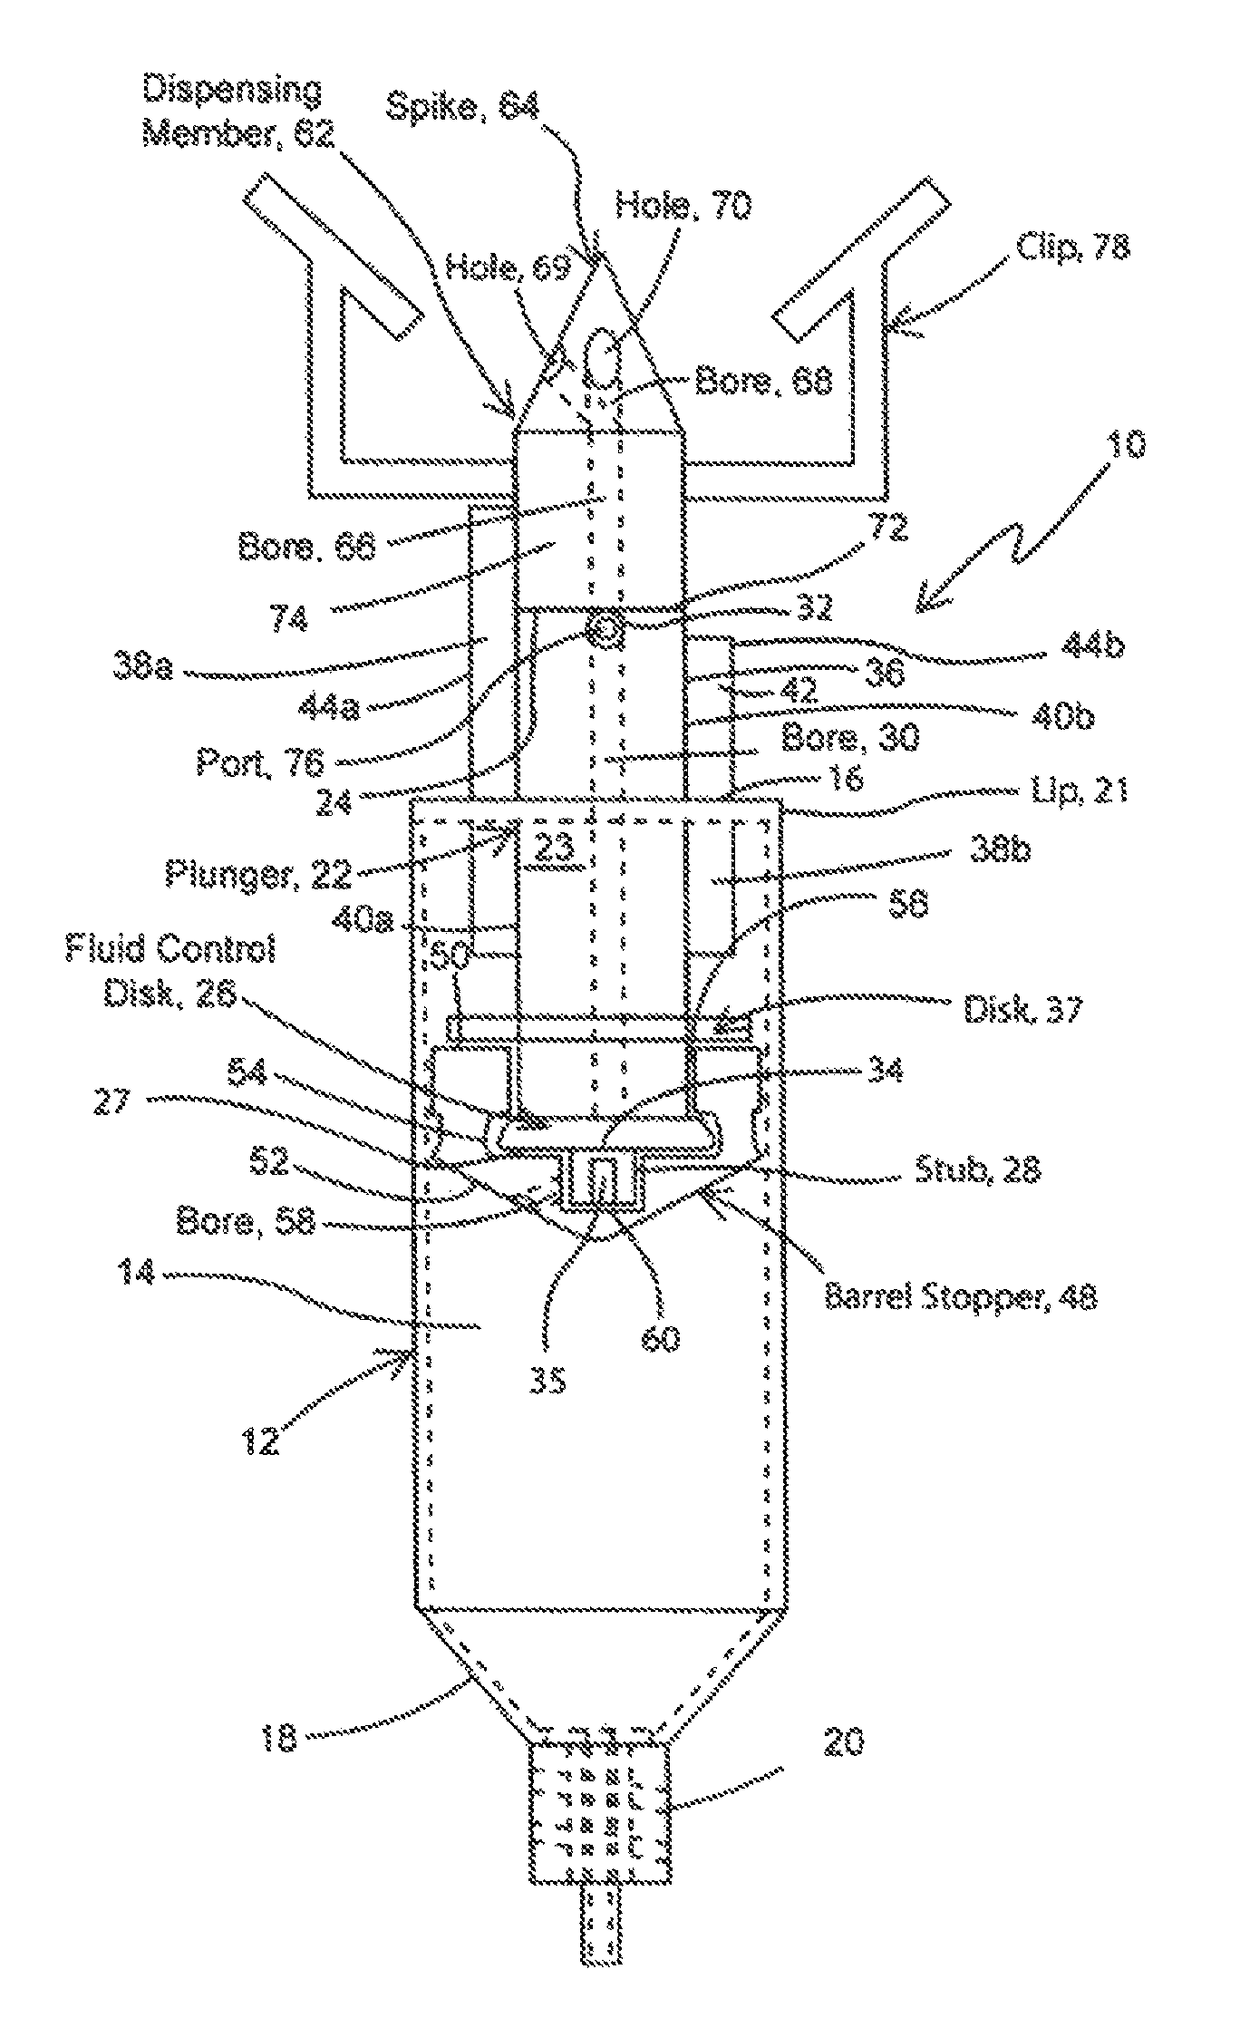 Syringe apparatus for transferring liquids into and out of a vial having a septum